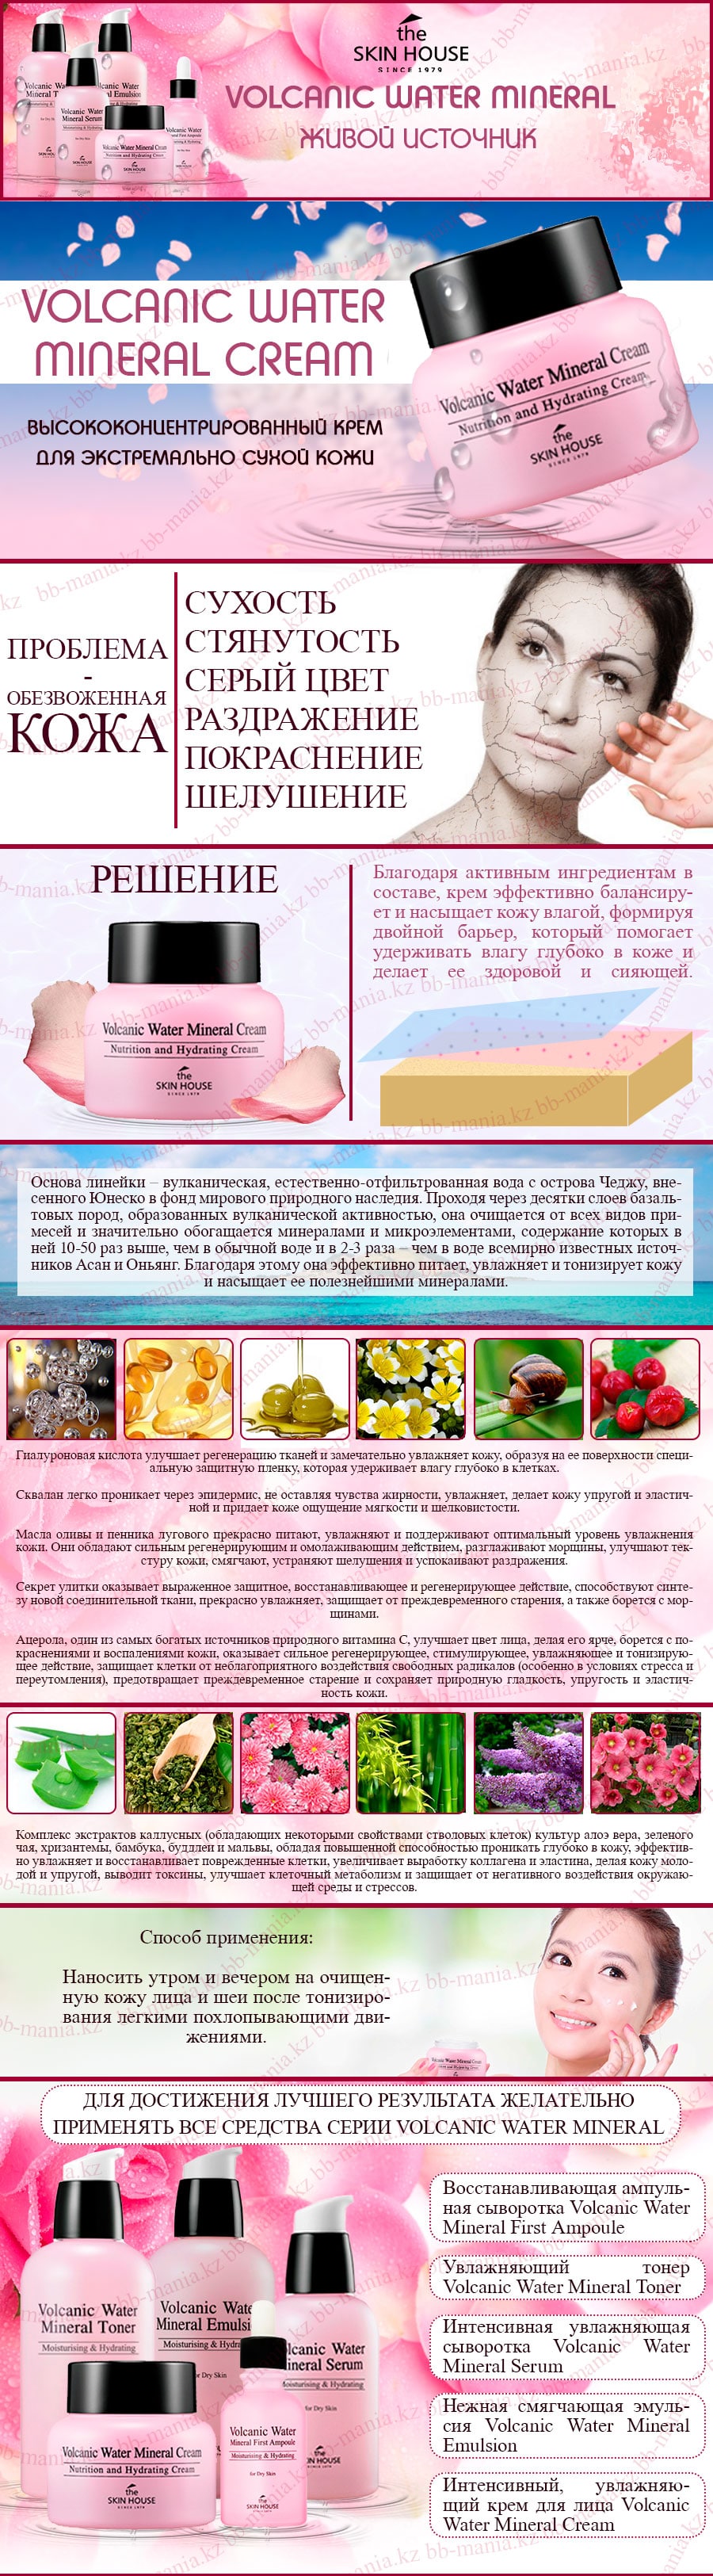 Volcanic-Water-Mineral-Cream-[The-Skin-House]-min